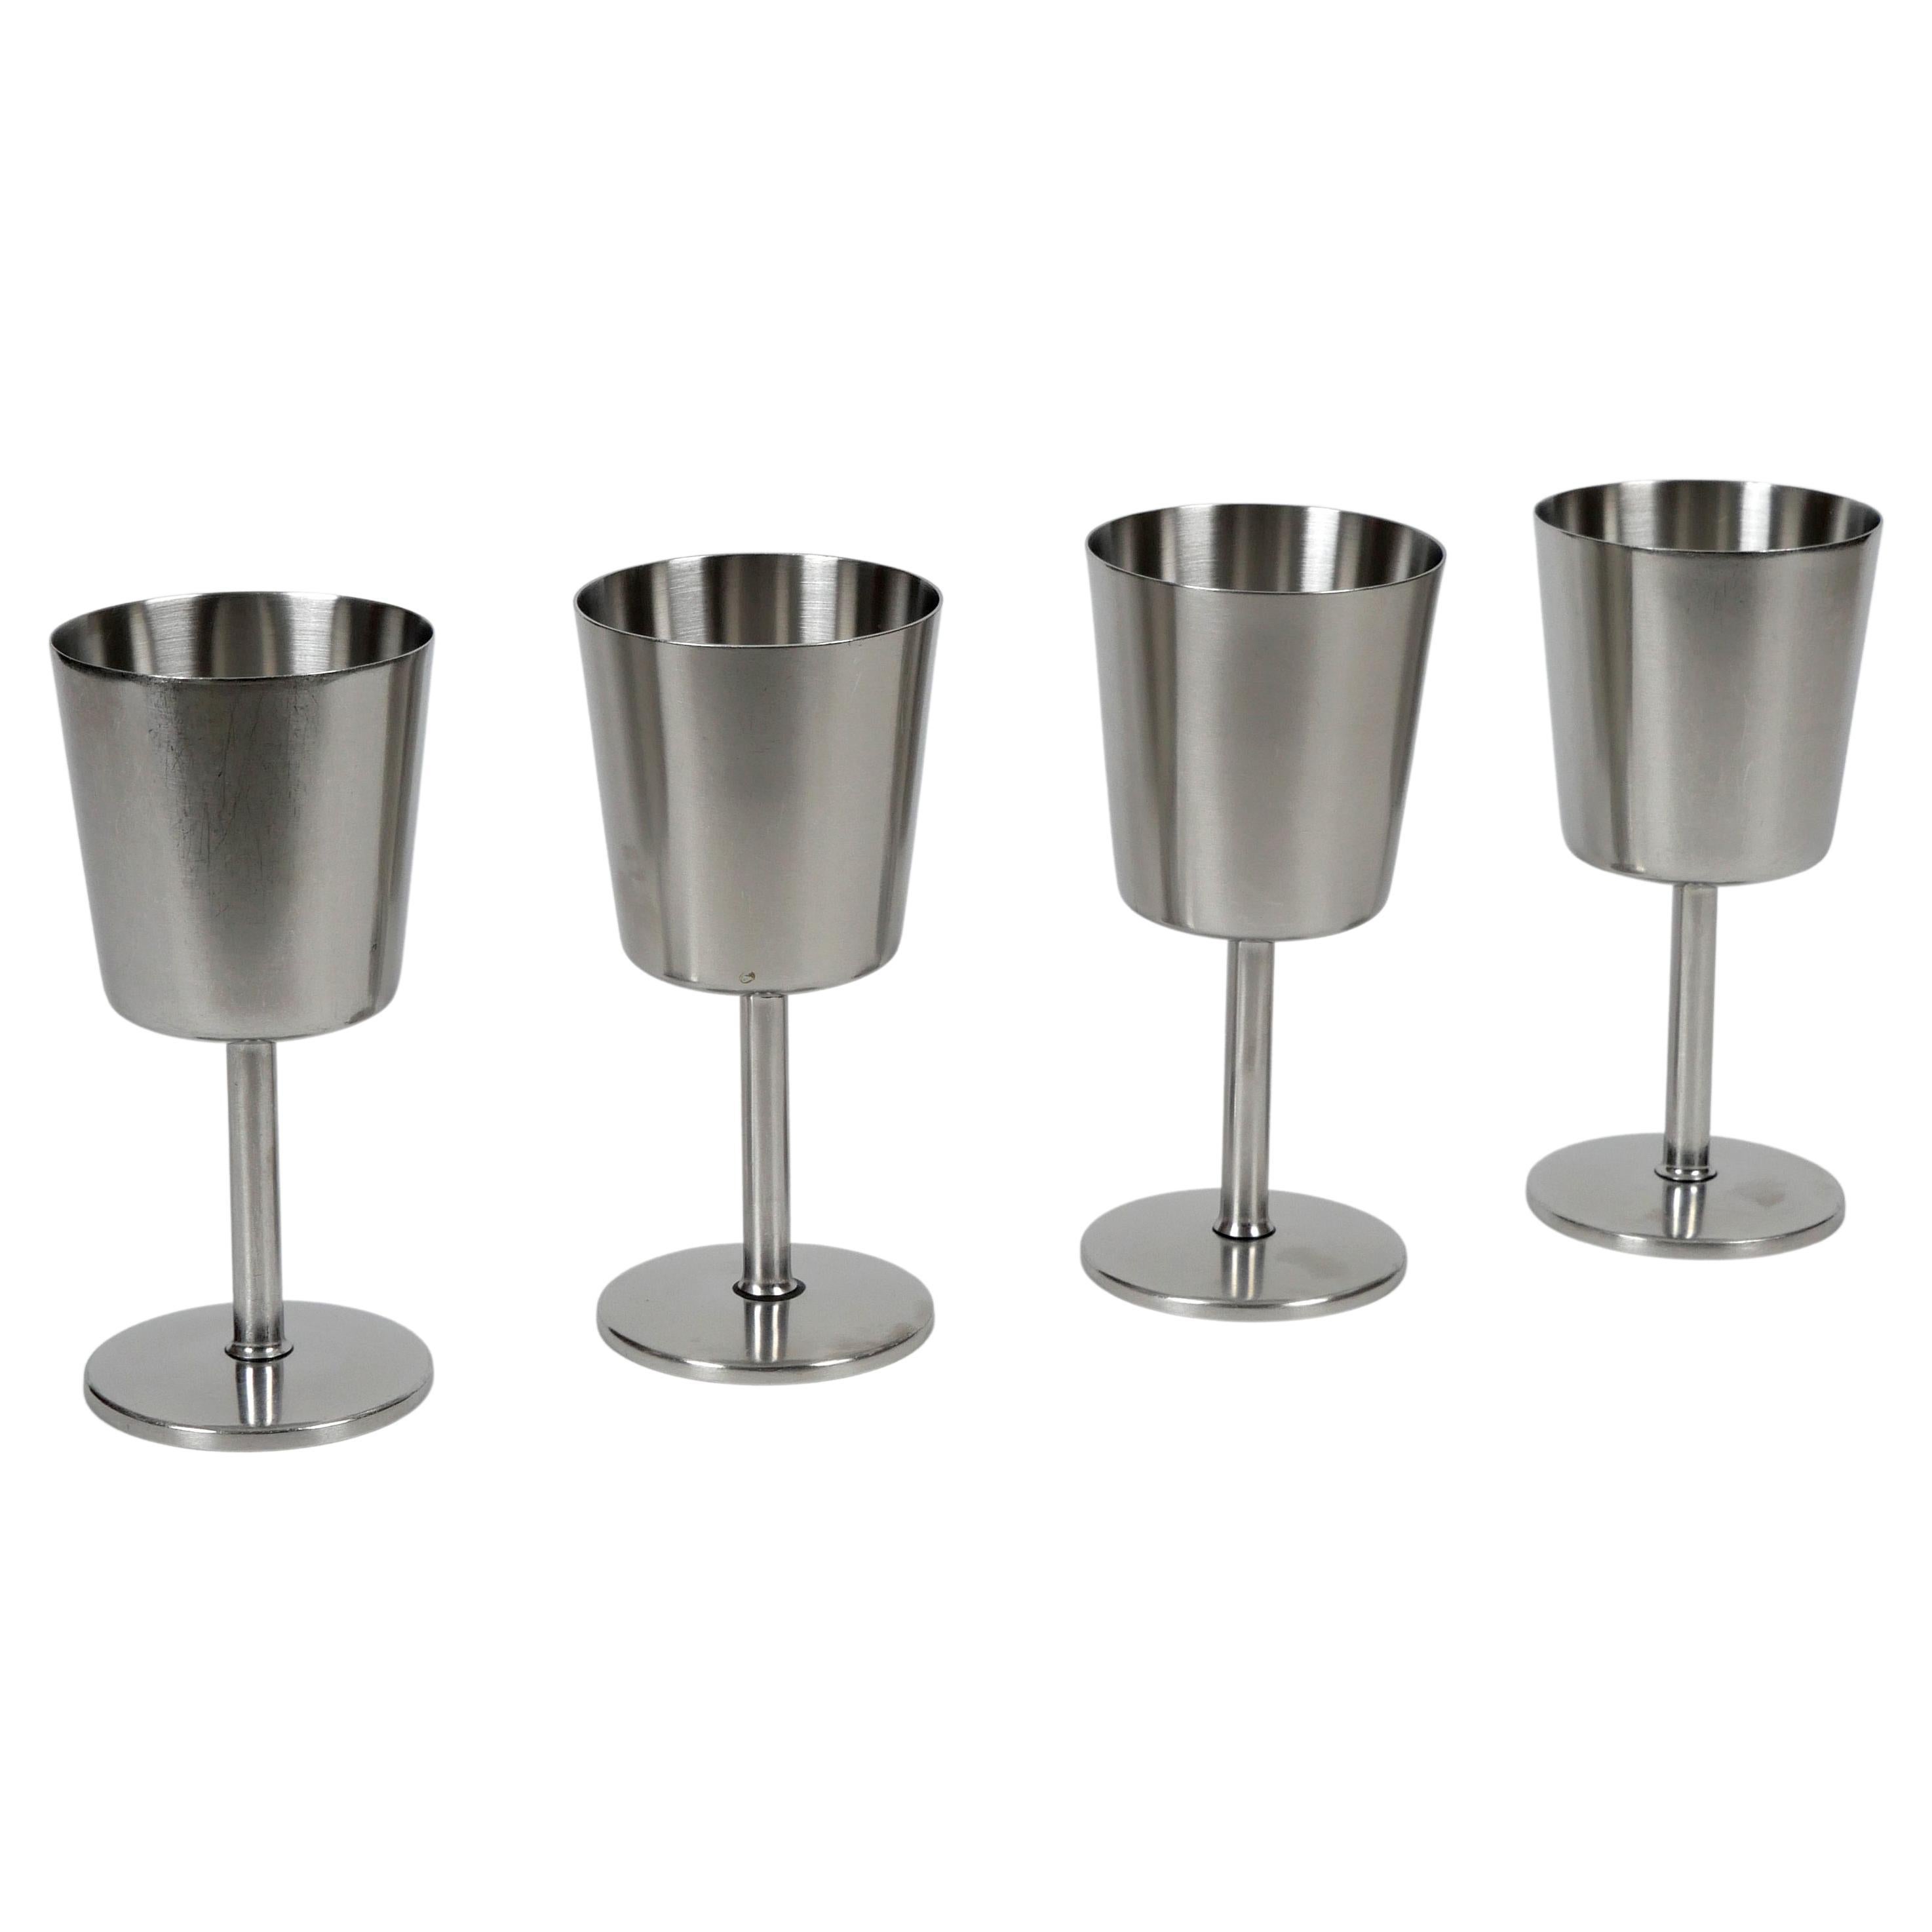 Robert Welch for Old Hall, Stainless Steel Wine Goblets, 1960s, Mid-Century For Sale